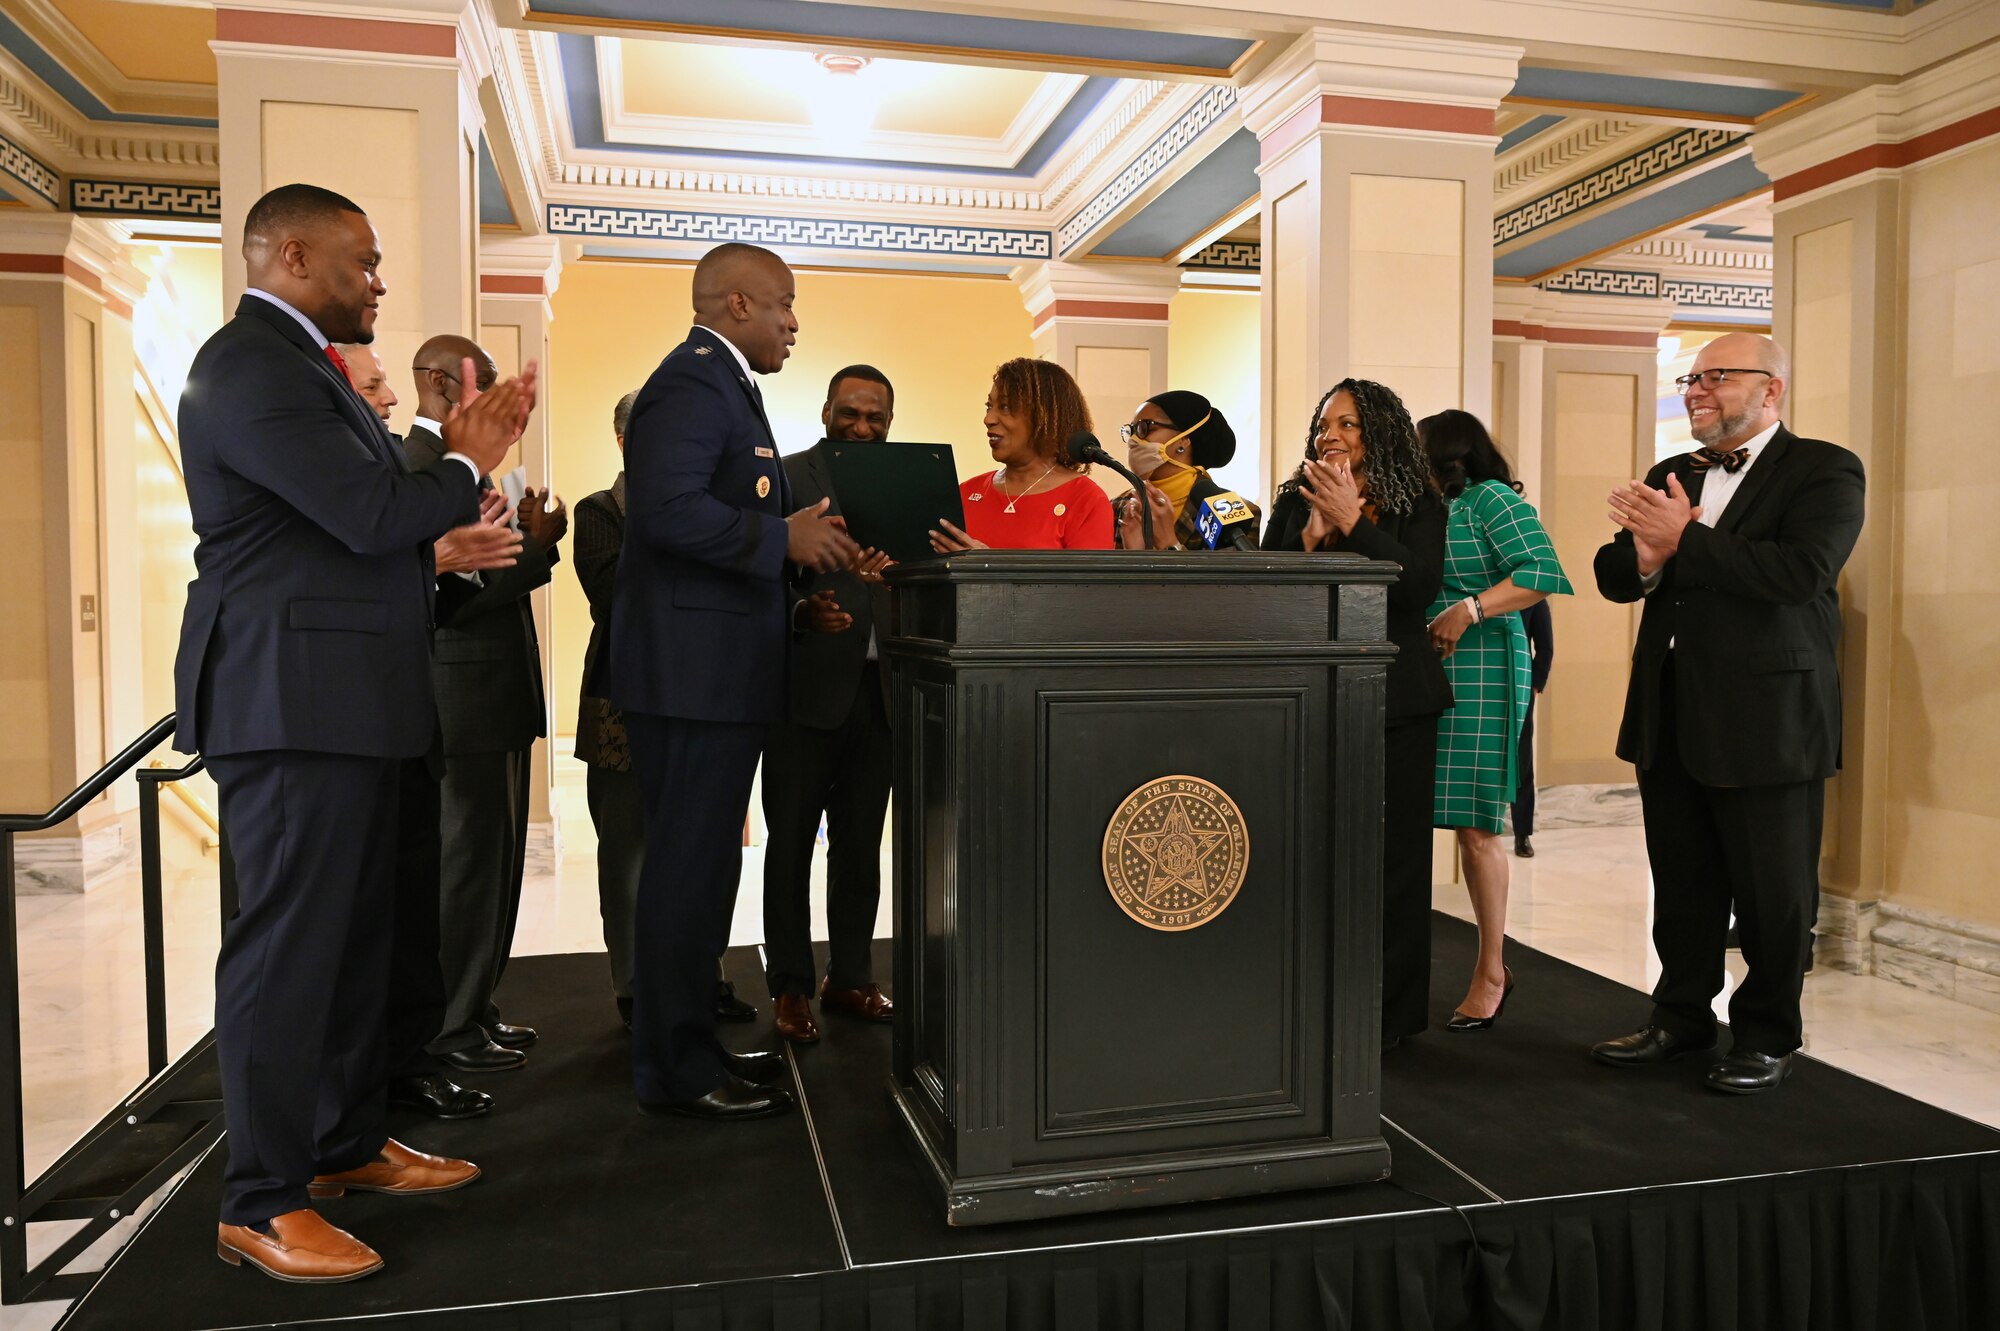 Lt. Gen. Stacey Hawkins, Air Force Sustainment Center commander, speaks to a crowd of students, community leaders, and Oklahoma State leaders during his keynote address at the inaugural Oklahoma Black History Day at the Capitol on Feb 13. (U.S. Air Force photo by Lemitchel King)